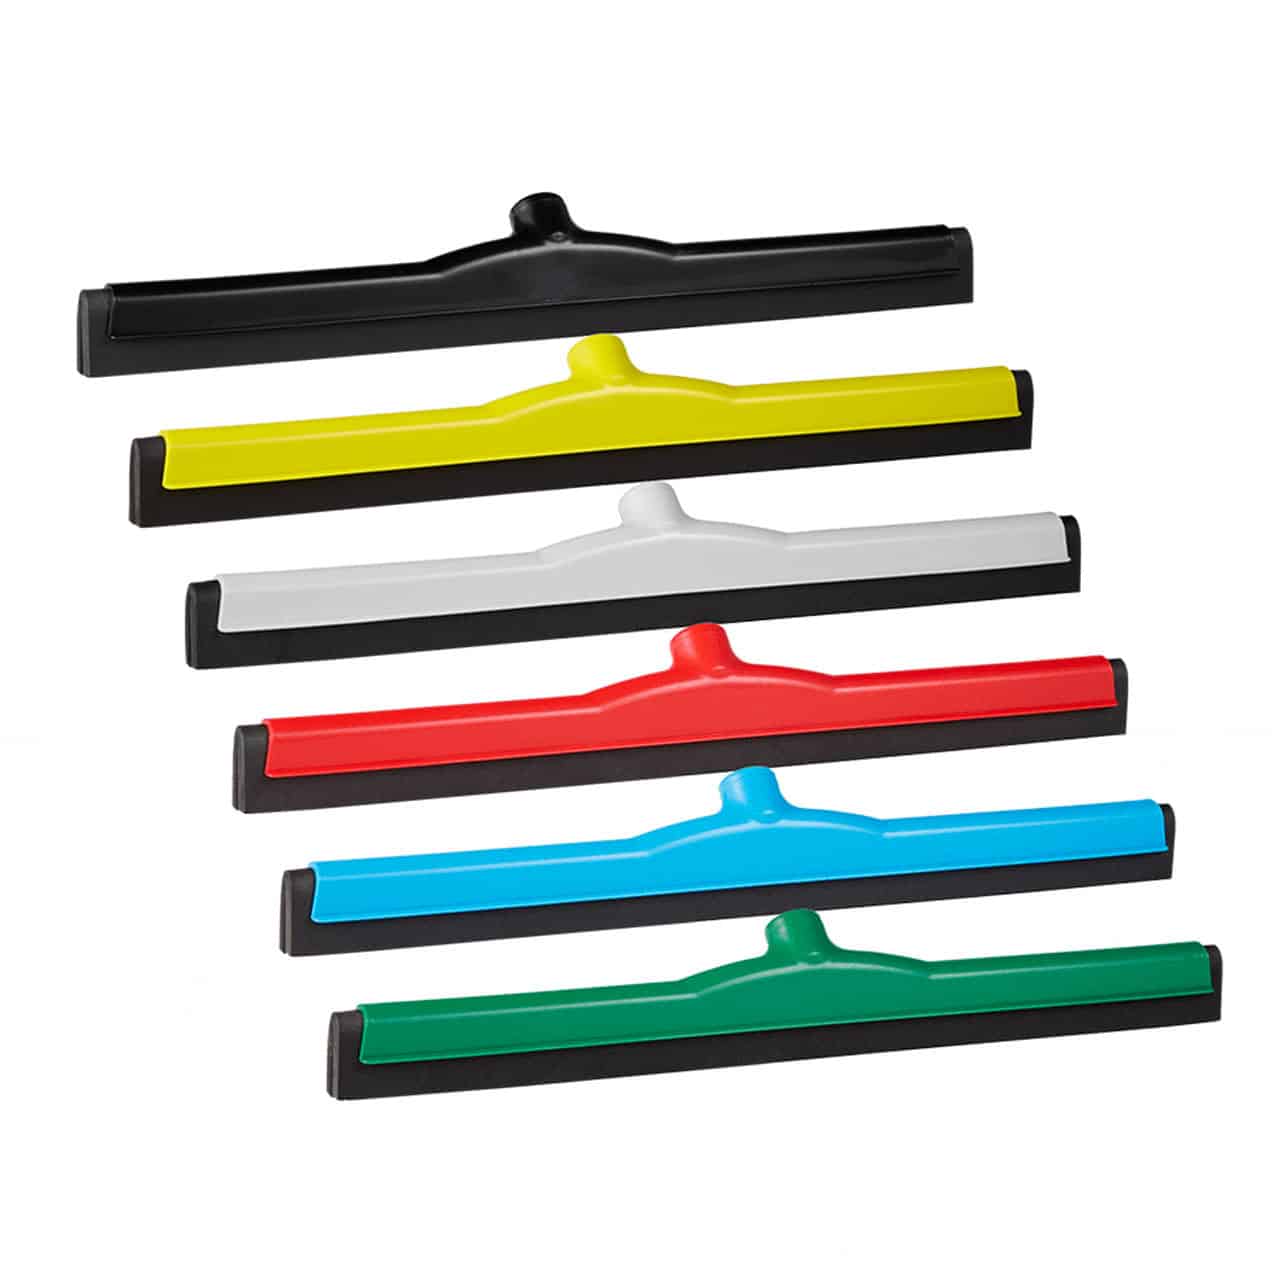 ColorCore 22″ Foam Blade Squeegee